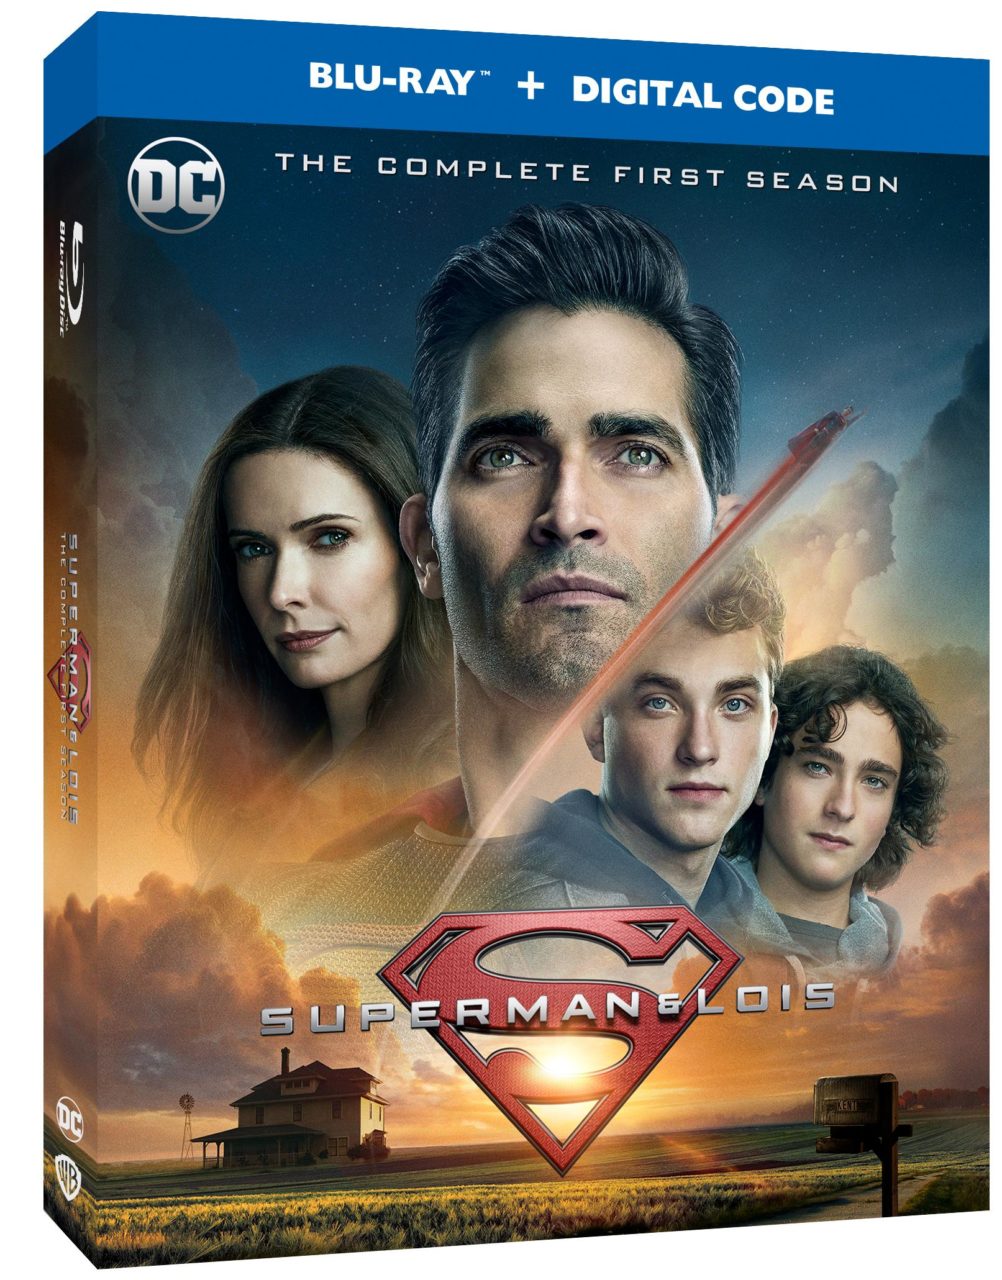 Superman & Lois: The Complete First Season Blu-Ray Combo Pack cover (Warner Bros. Home Entertainment)